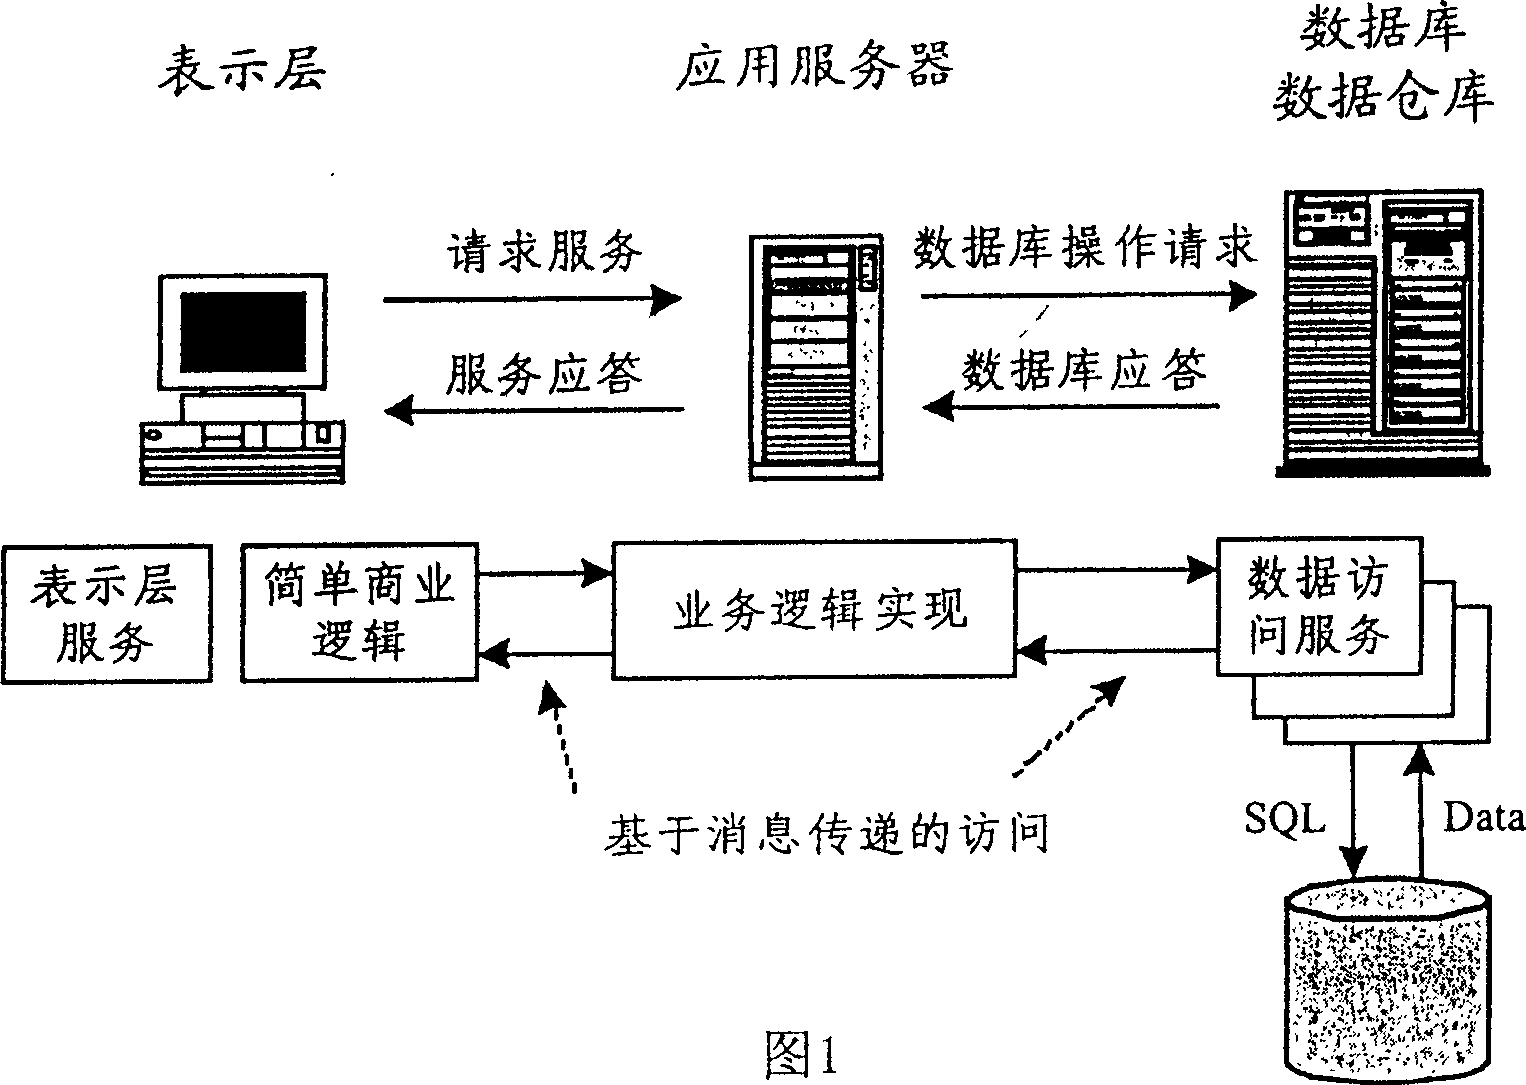 Container dock management method and system